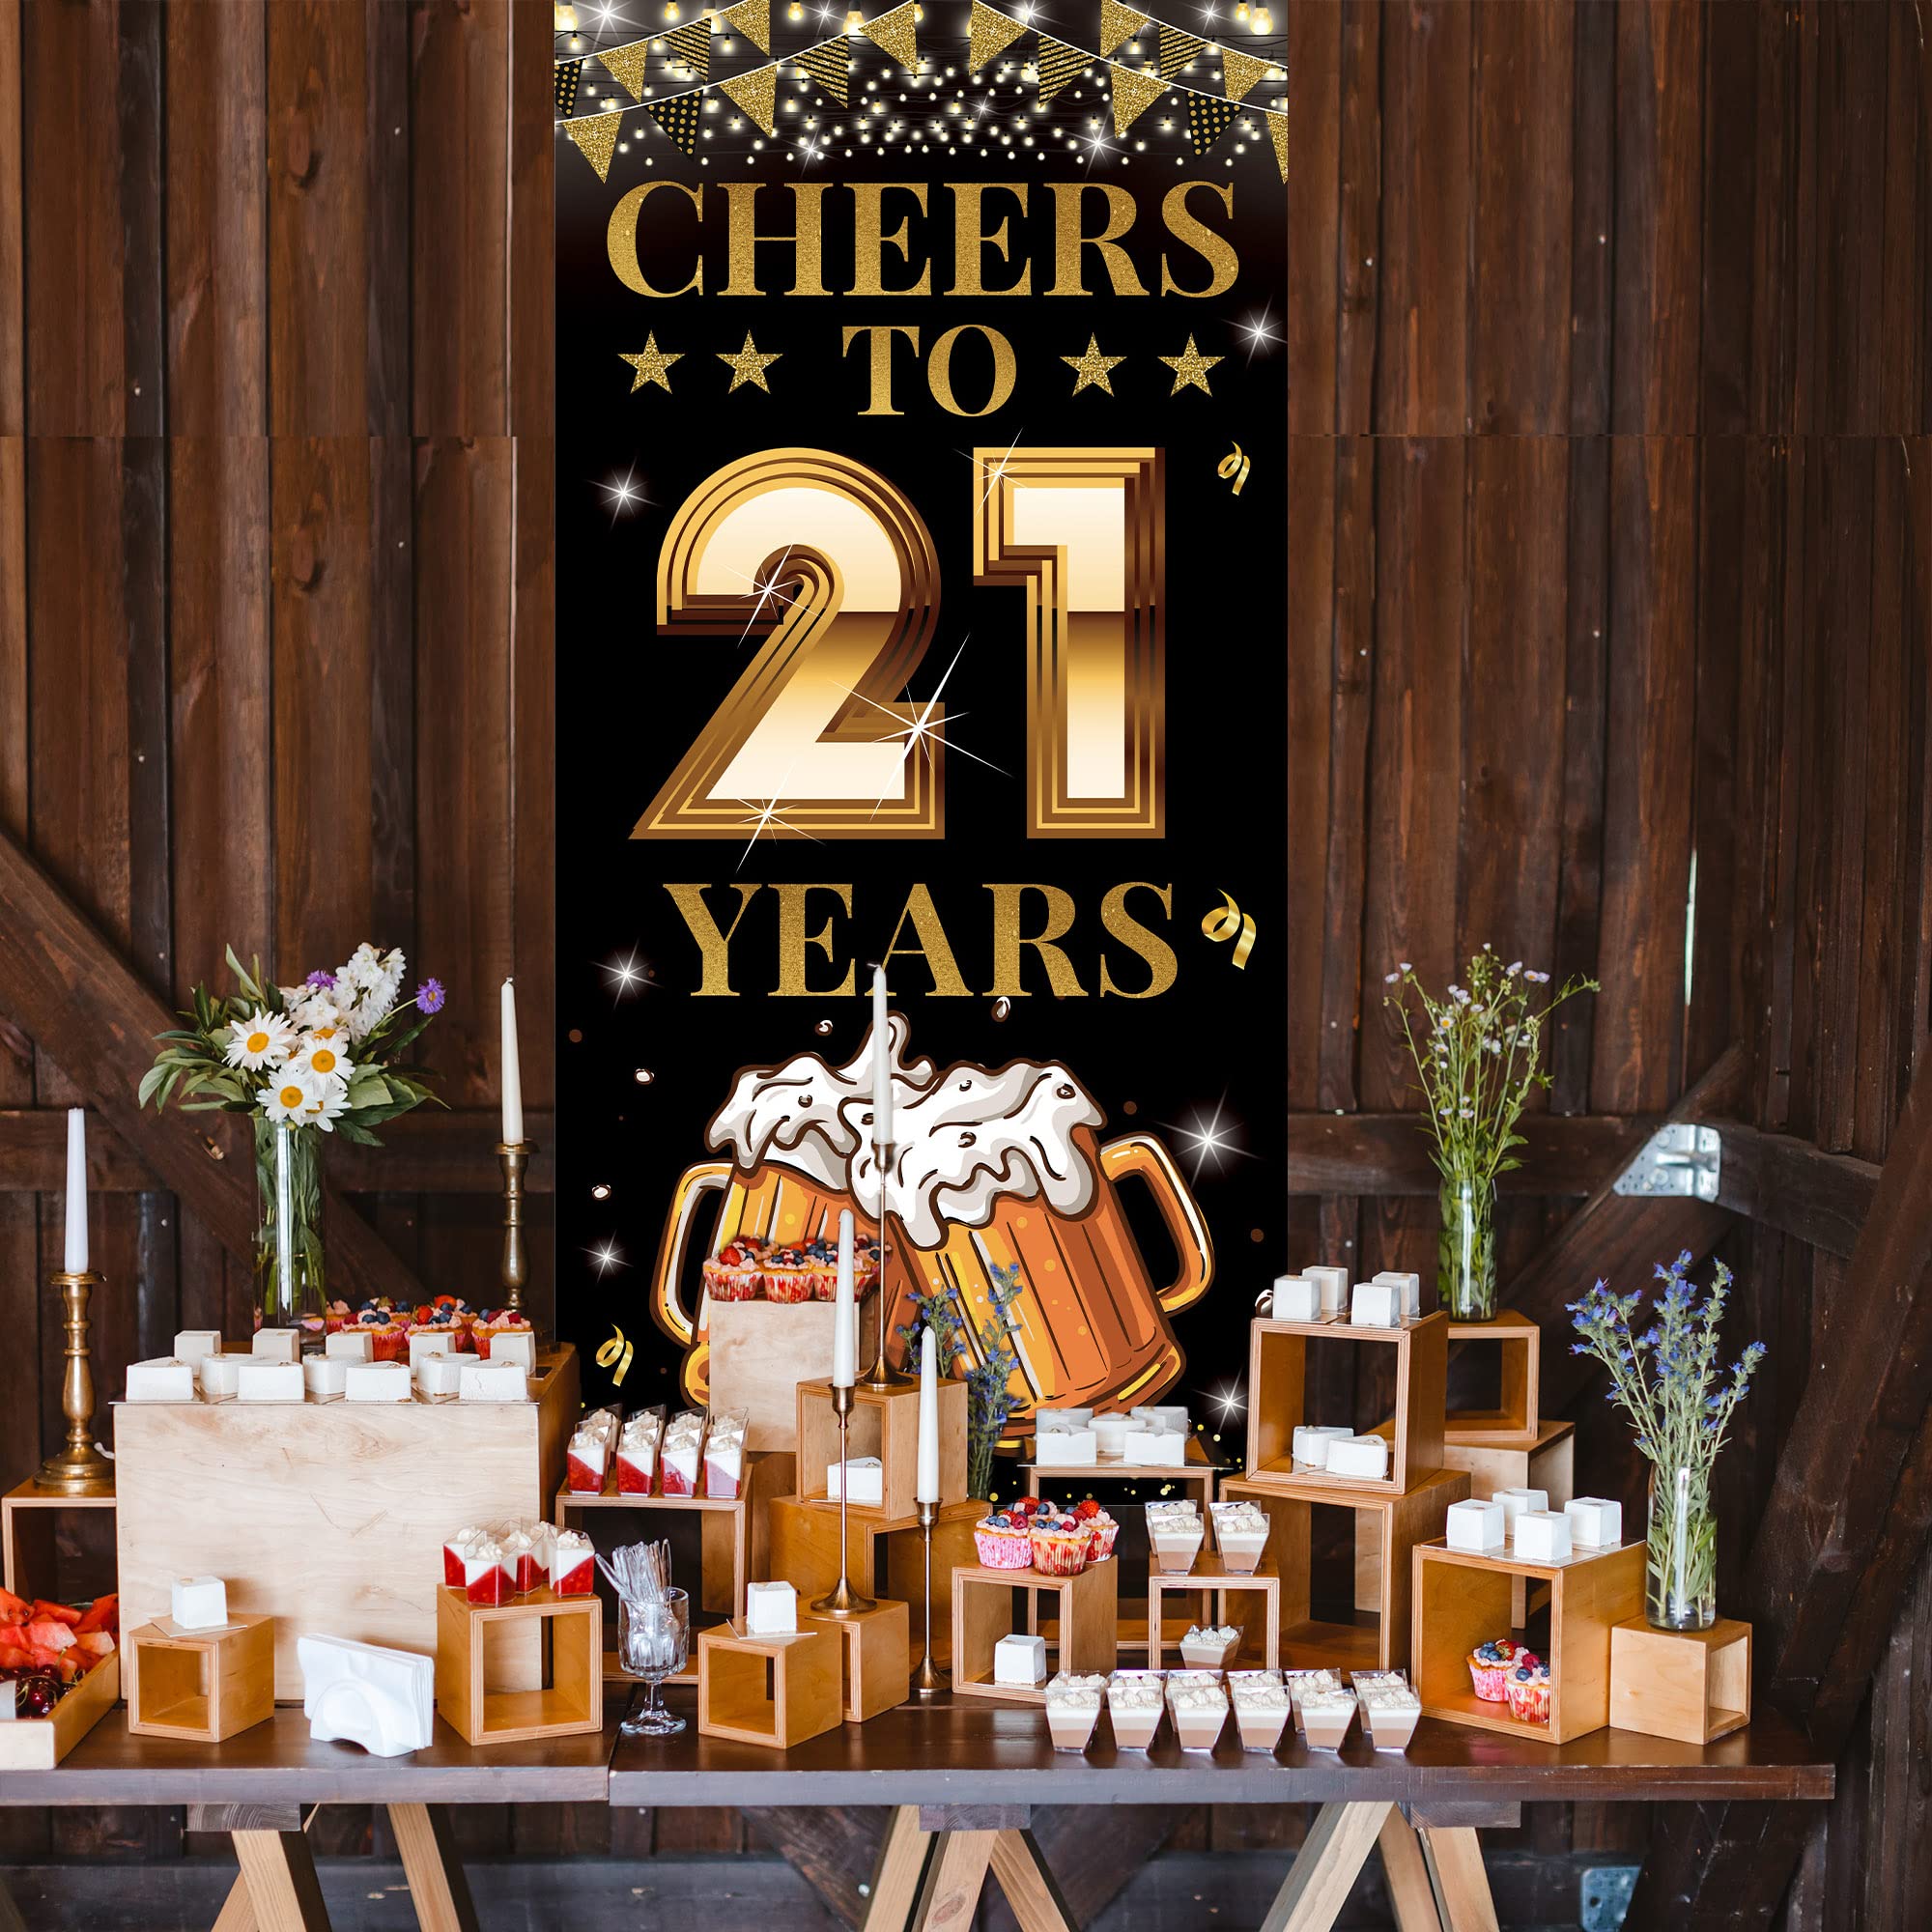 21st Birthday Decorations for Him Her, Cheers to 21 Years Birthday Door Banner, Black Gold 21st Birthday Yard Sign, 21 Birthday Party Backdrop Photo Props Poster for Outdoor Indoor, Fabric, Vicycaty